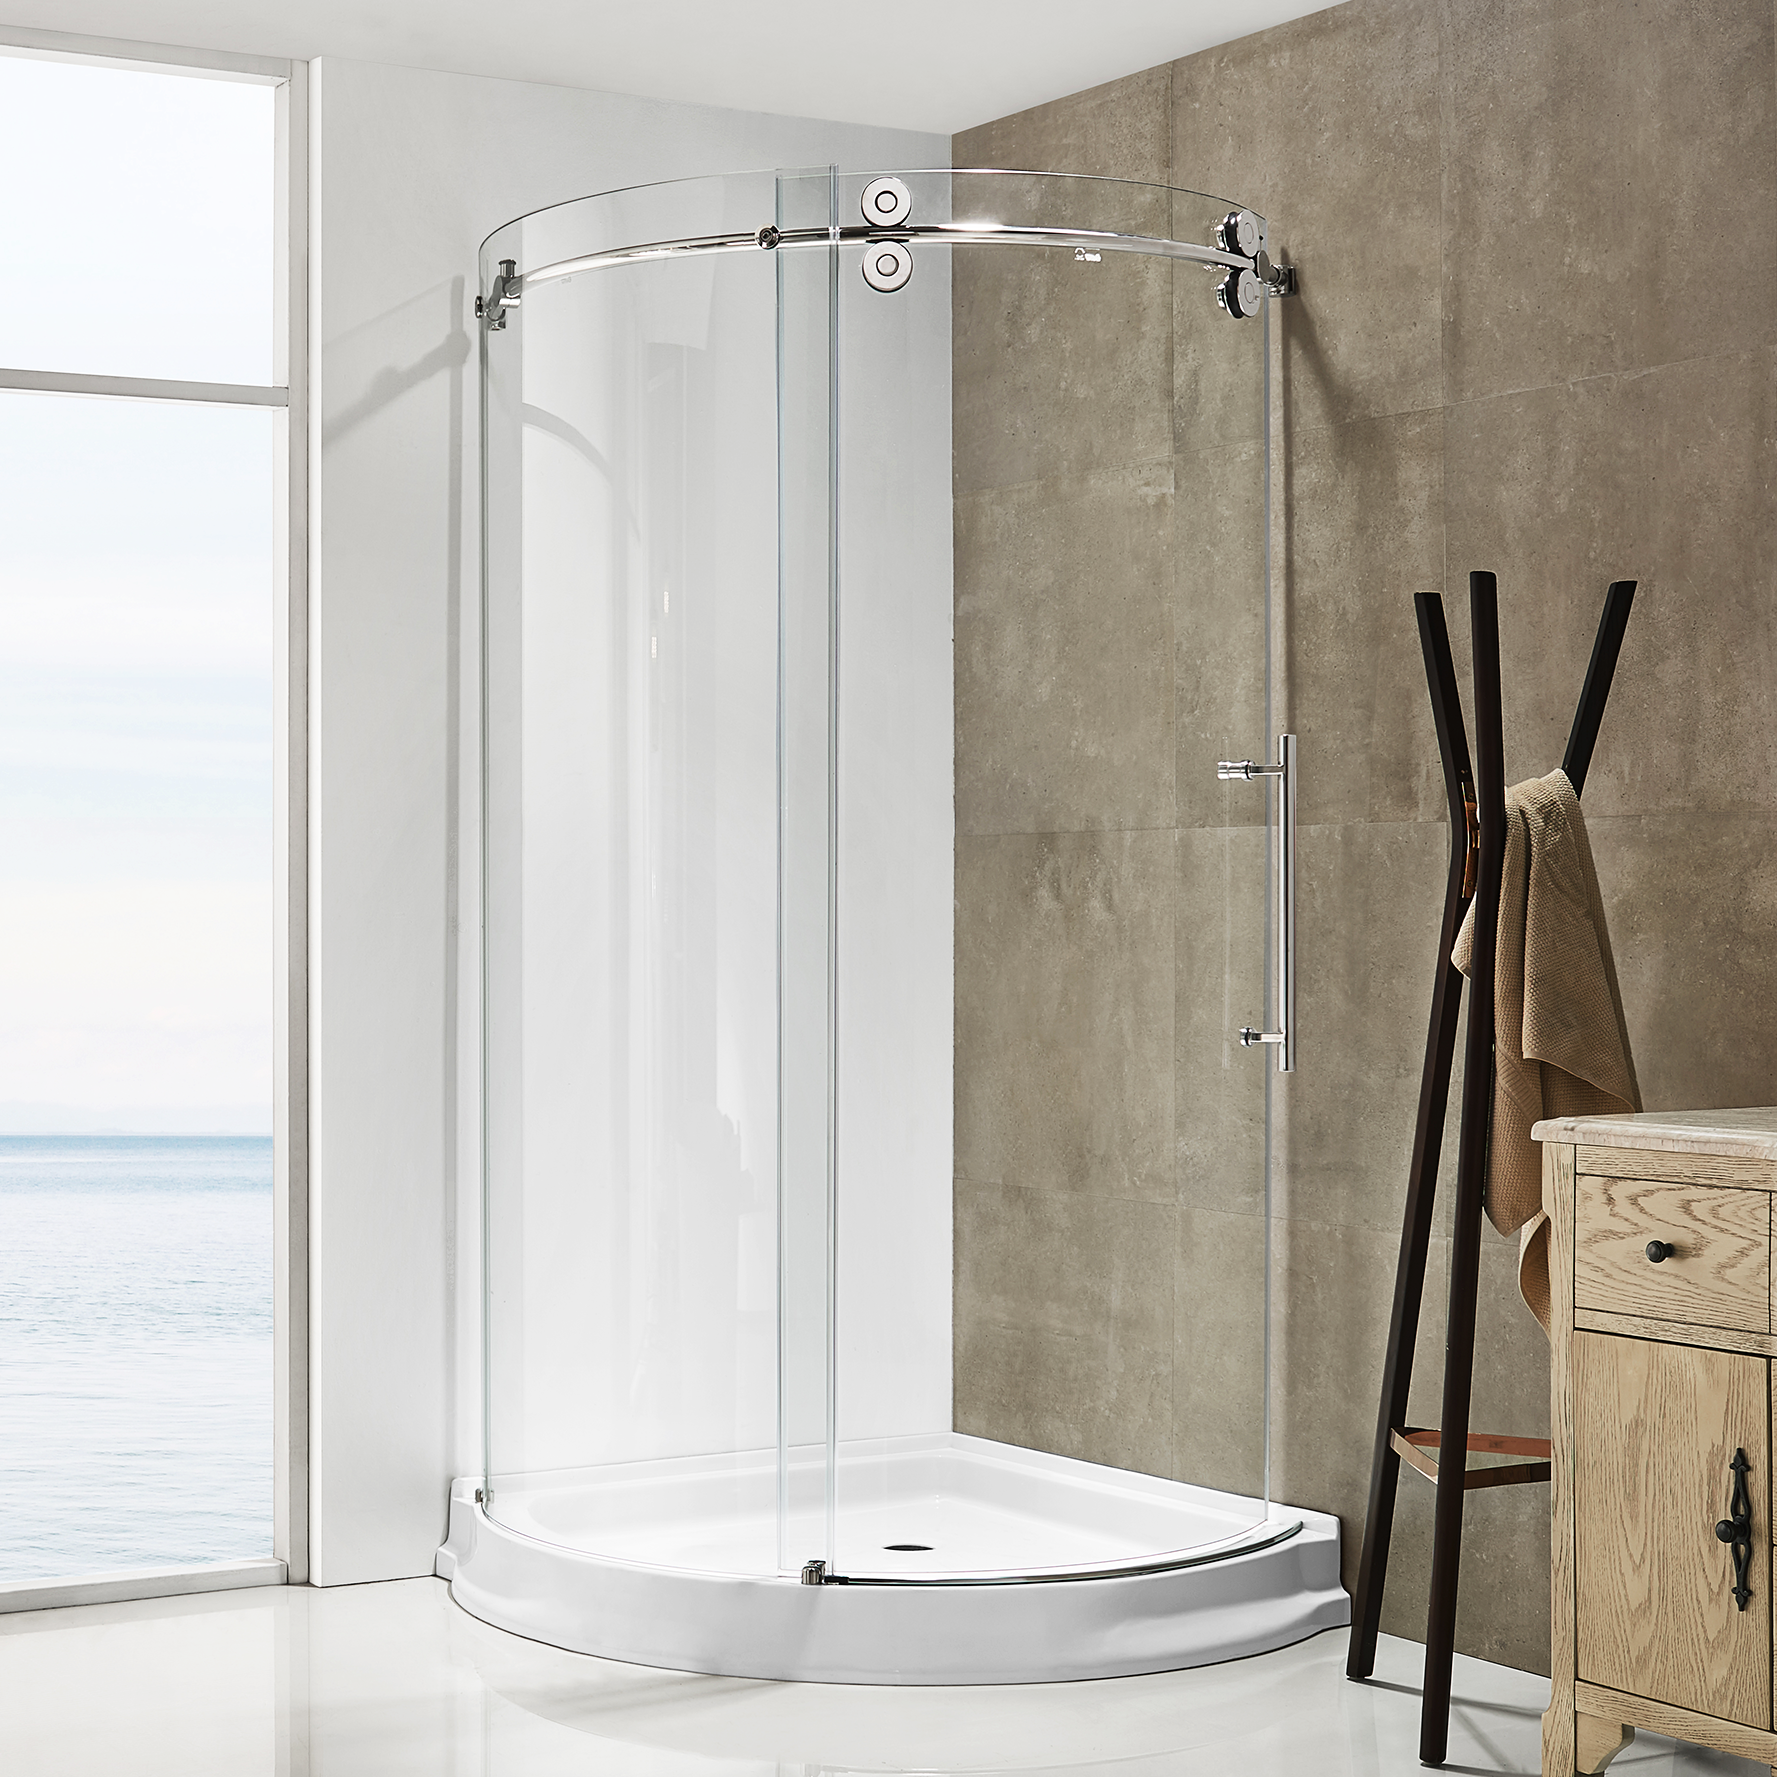 Dreamwerks 40"W x 79"H Frameless Shower Door Enclosure in Chrome Finish - Clear or Frosted Glass - Dreamwerks